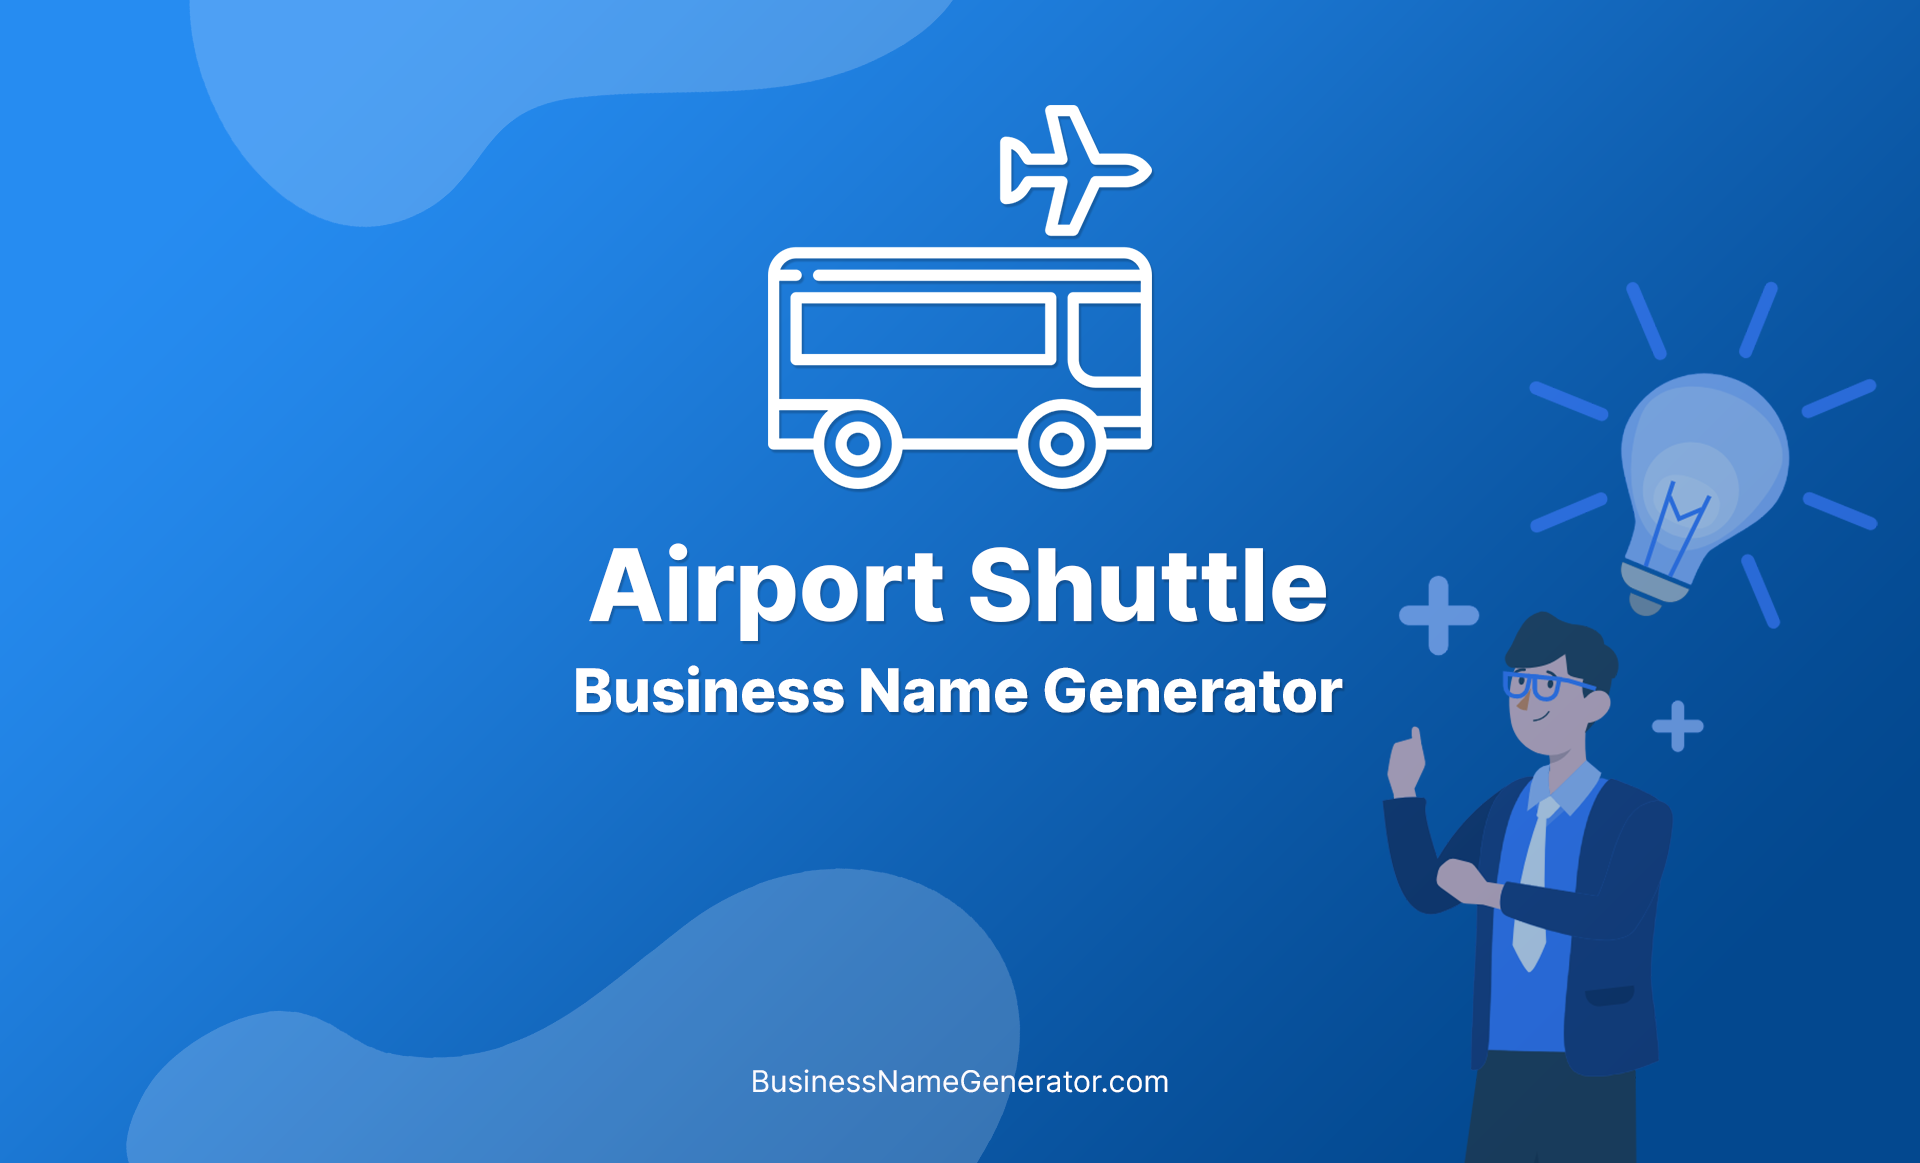 Airport Shuttle Business Name Generator